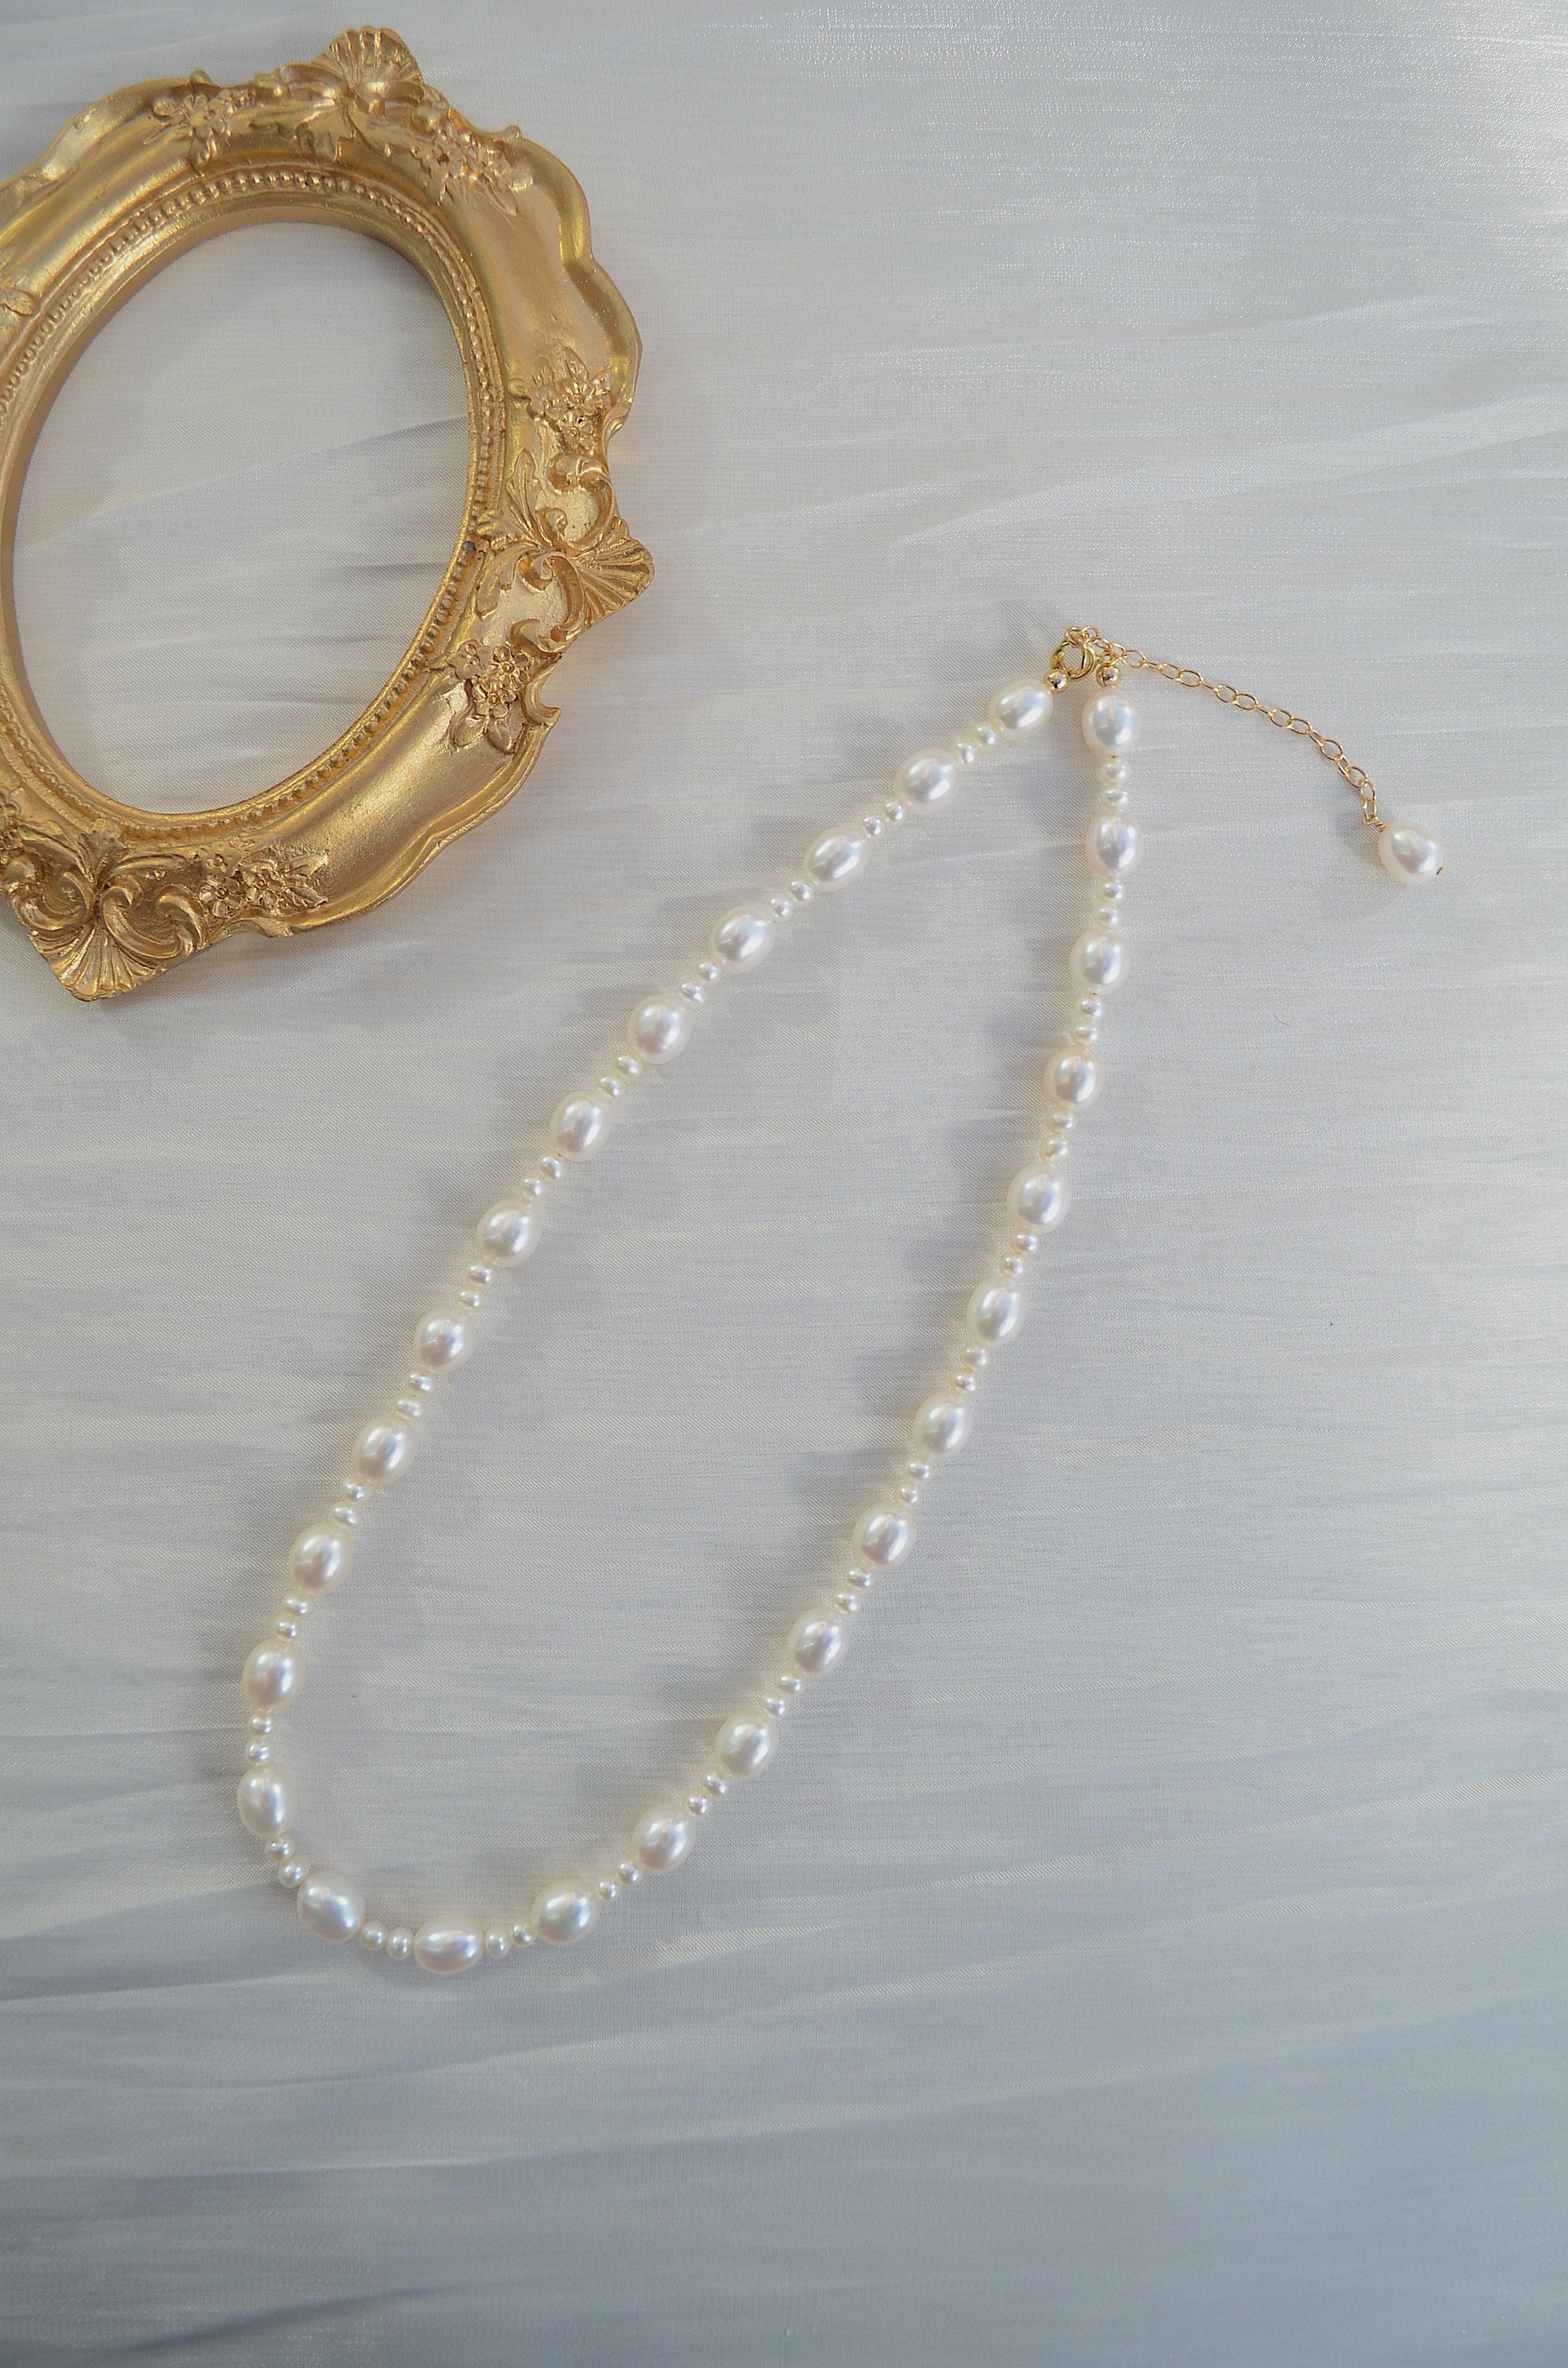 Leah-rice Pearl Necklace Statement Necklace Gift for Her - Etsy